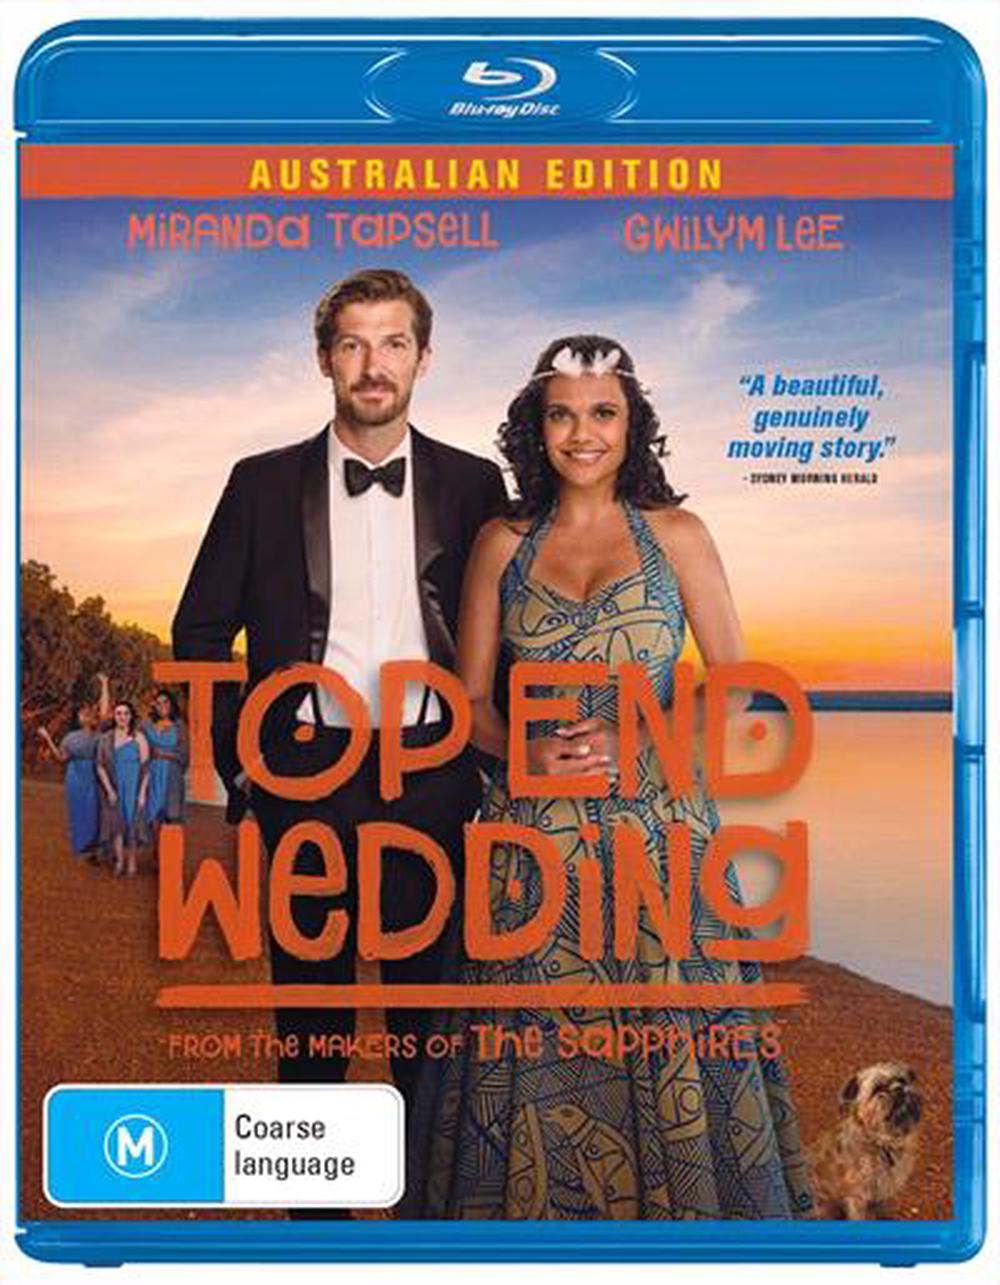 Oprør Rend Vært for Top End Wedding, Blu-Ray | Buy online at The Nile